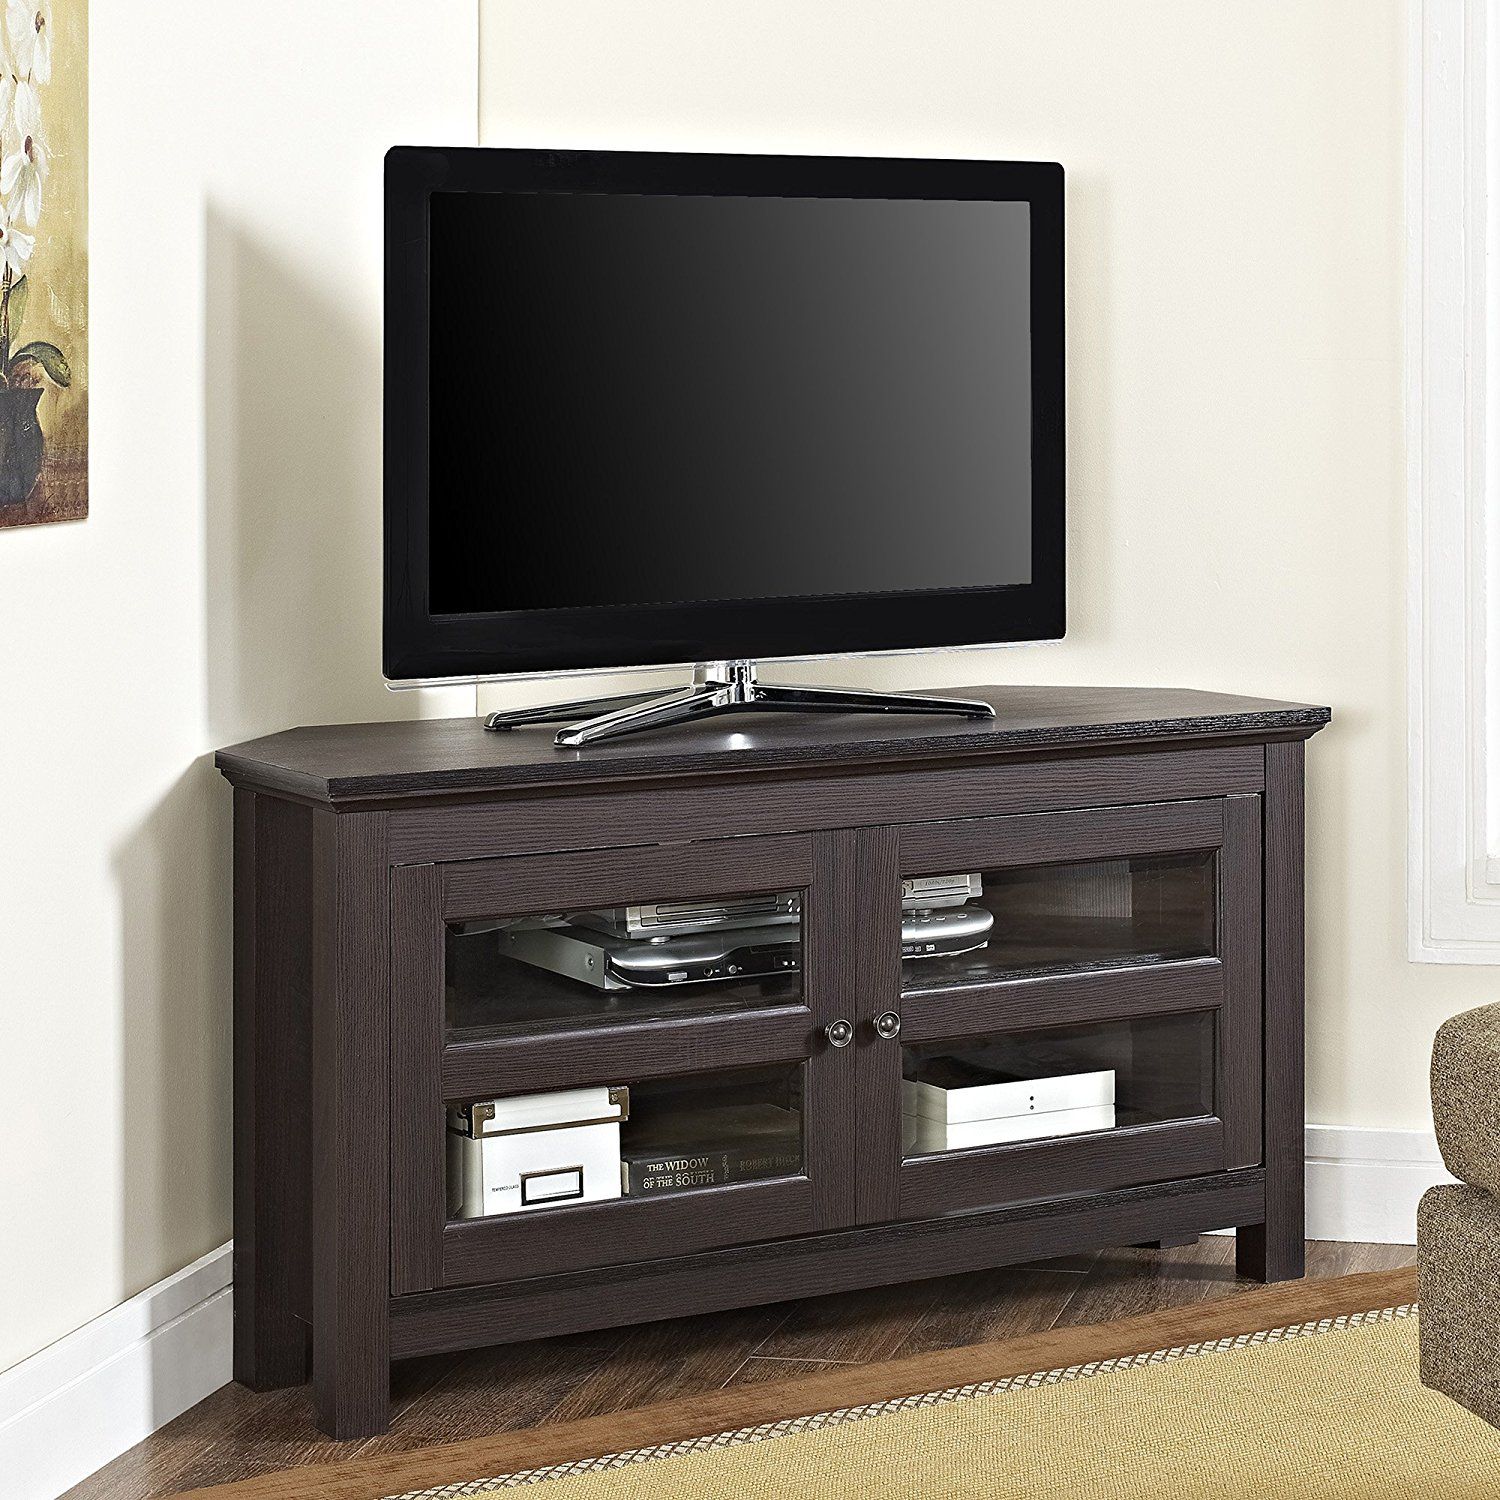 Top 10 Best Modern Tall Corner Tv Stands In 2021 Reviews Inside Tall Tv Cabinets Corner Unit (View 2 of 15)